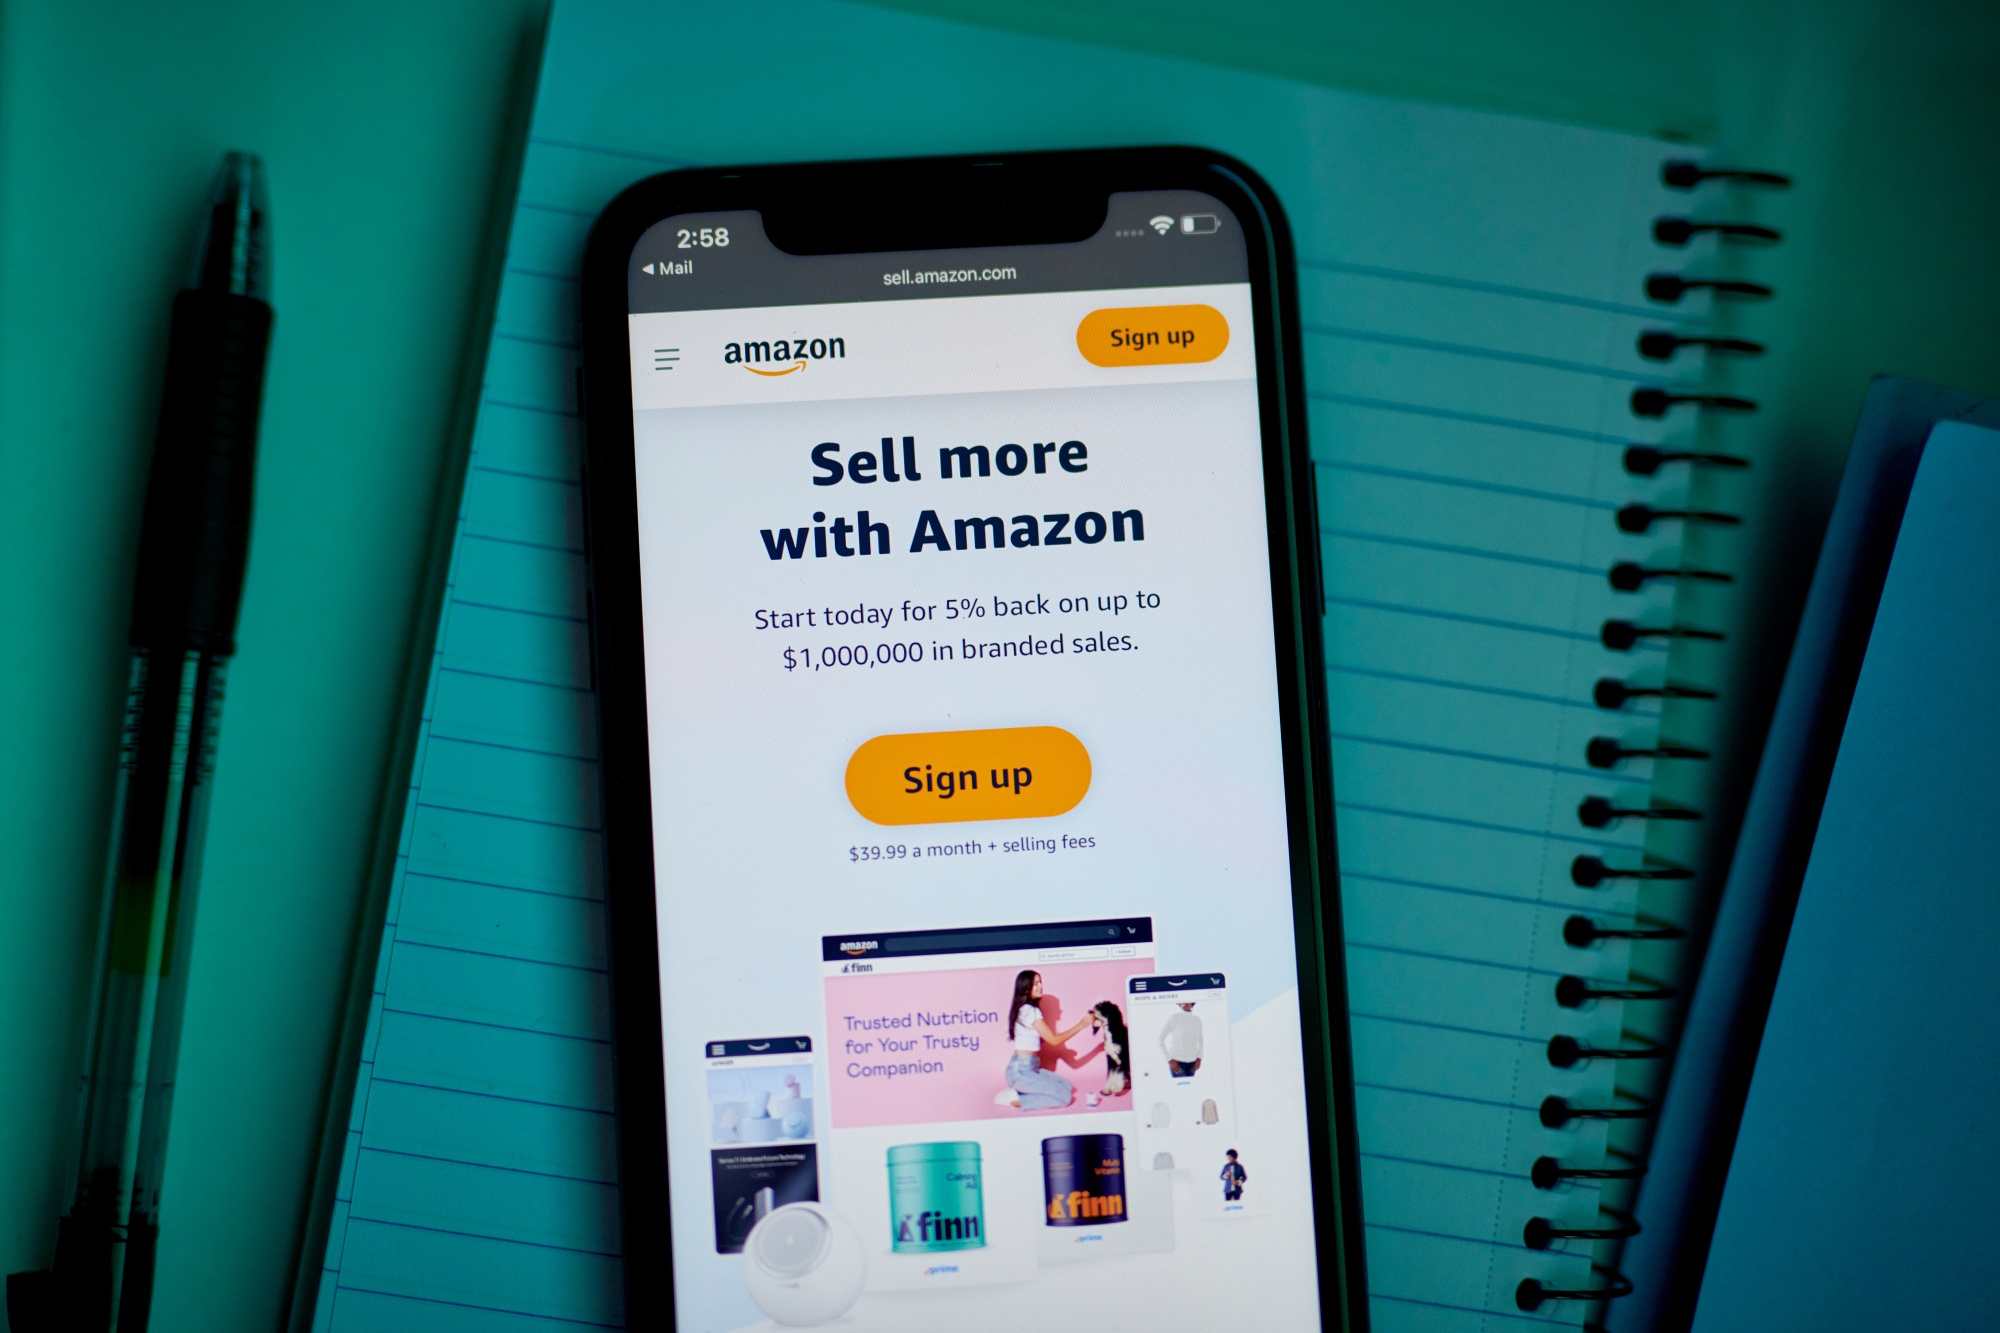 Amazon’s lawyer wrote that the company was willing to change its seller notices and pricing policies to make clear it doesn’t require price parity with other websites.